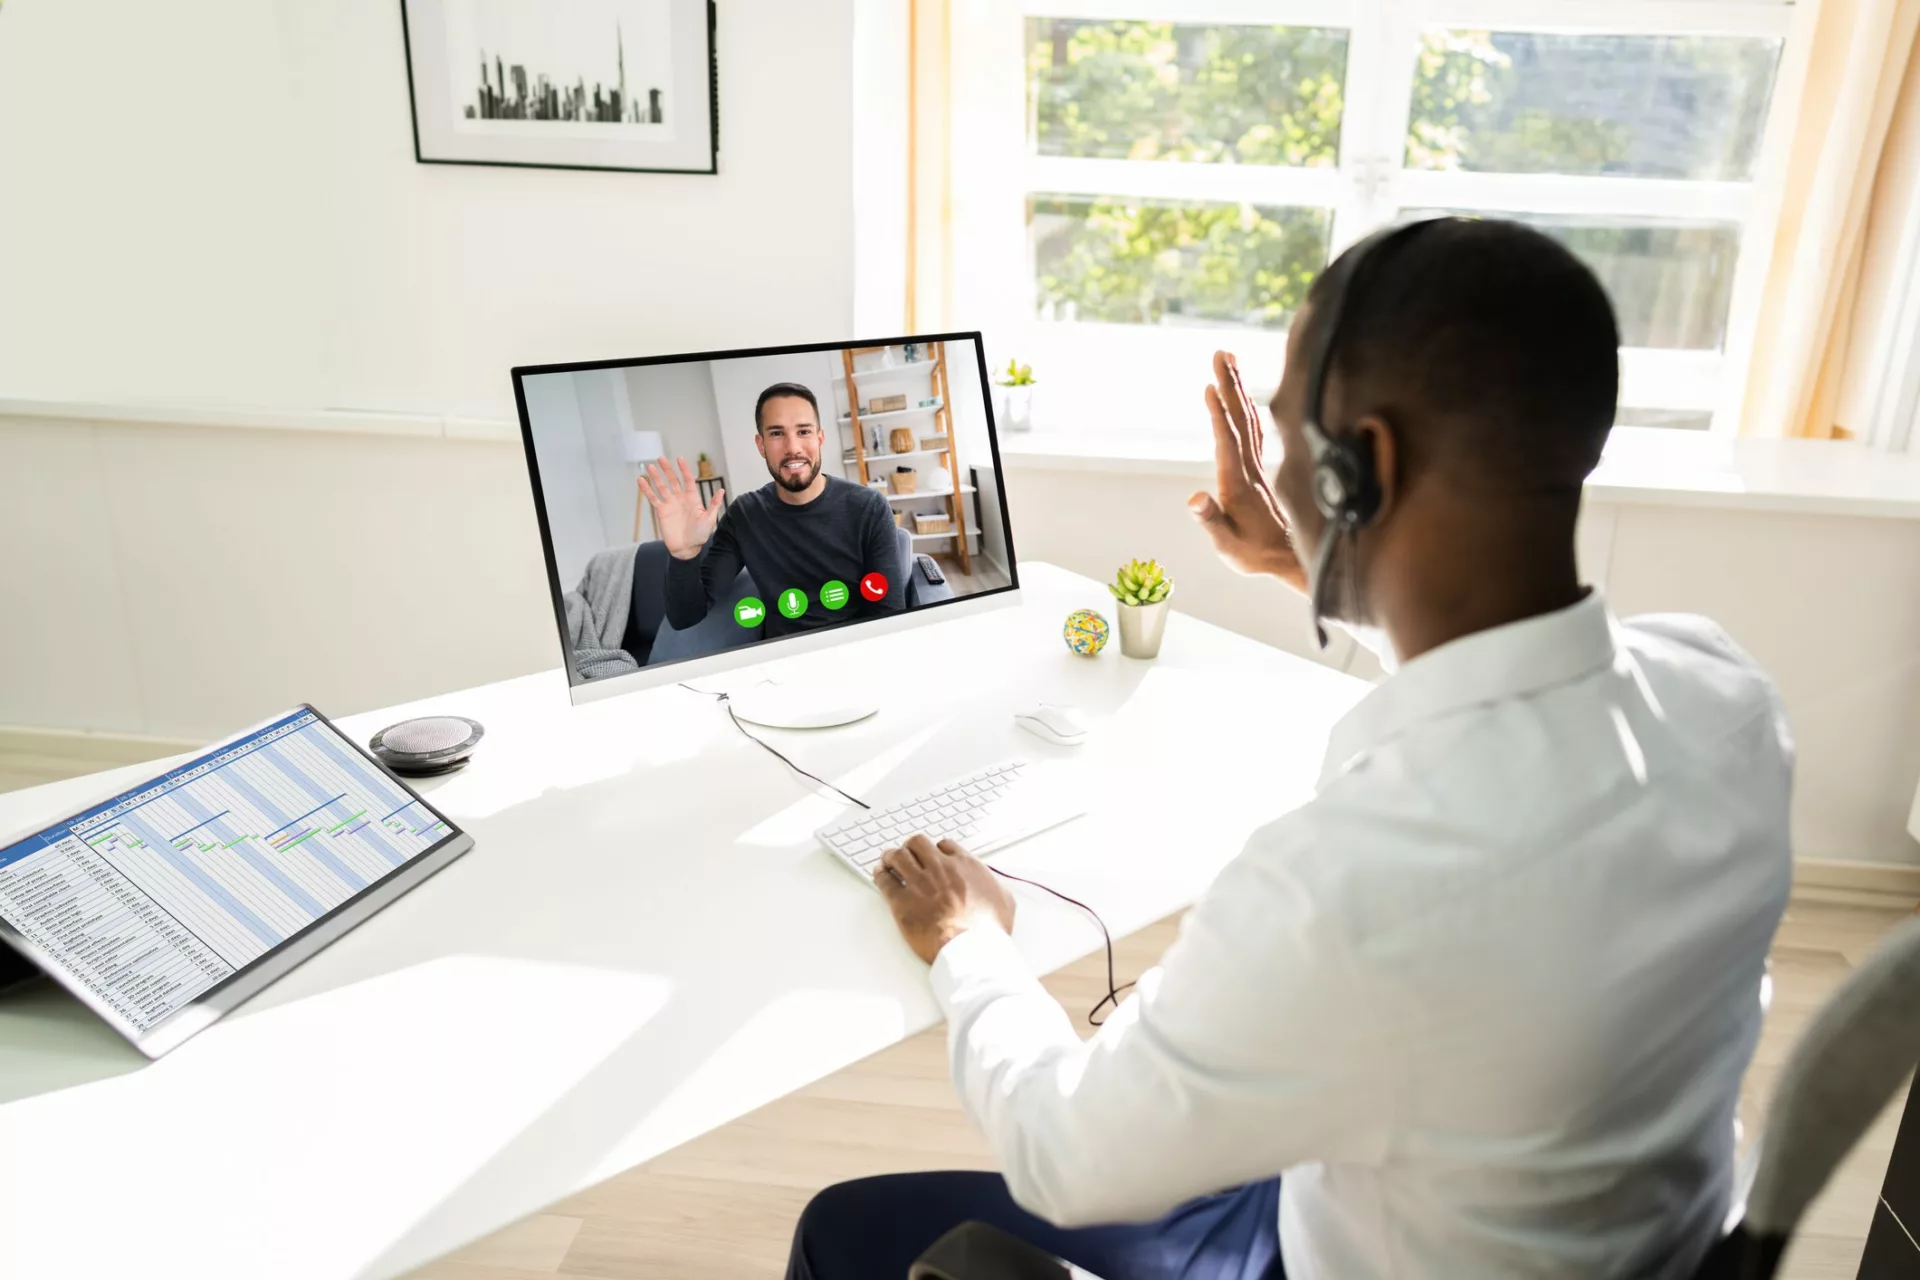 man on video calling waving goodbye to departing coworker and preparing for cost of losing an employee